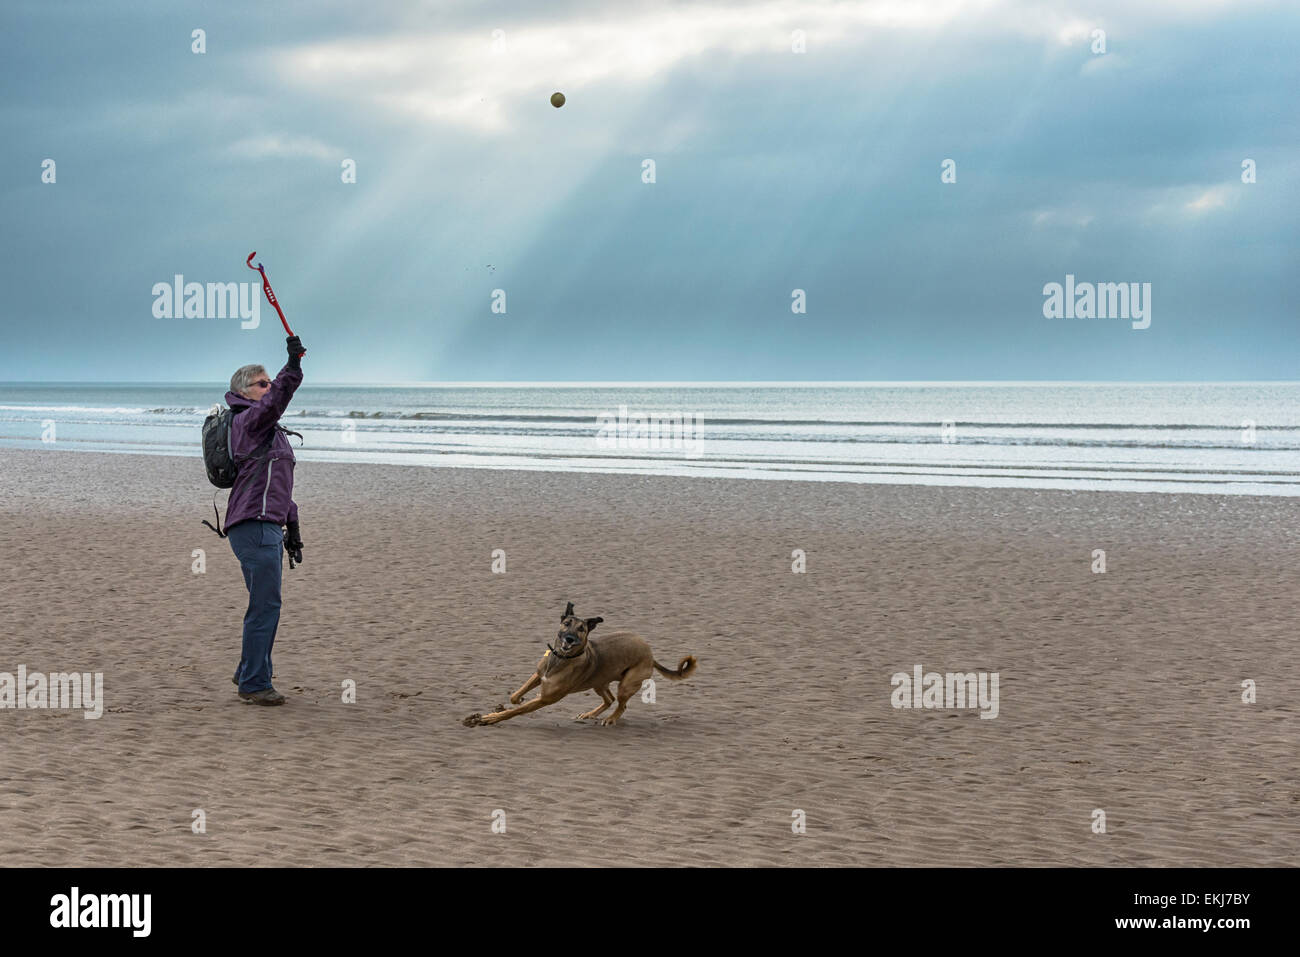 A woman launching a ball for her dog on Drigg beach, Cumbria, England. Sunlight pierce the cloudy sky like to lit the scene Stock Photo